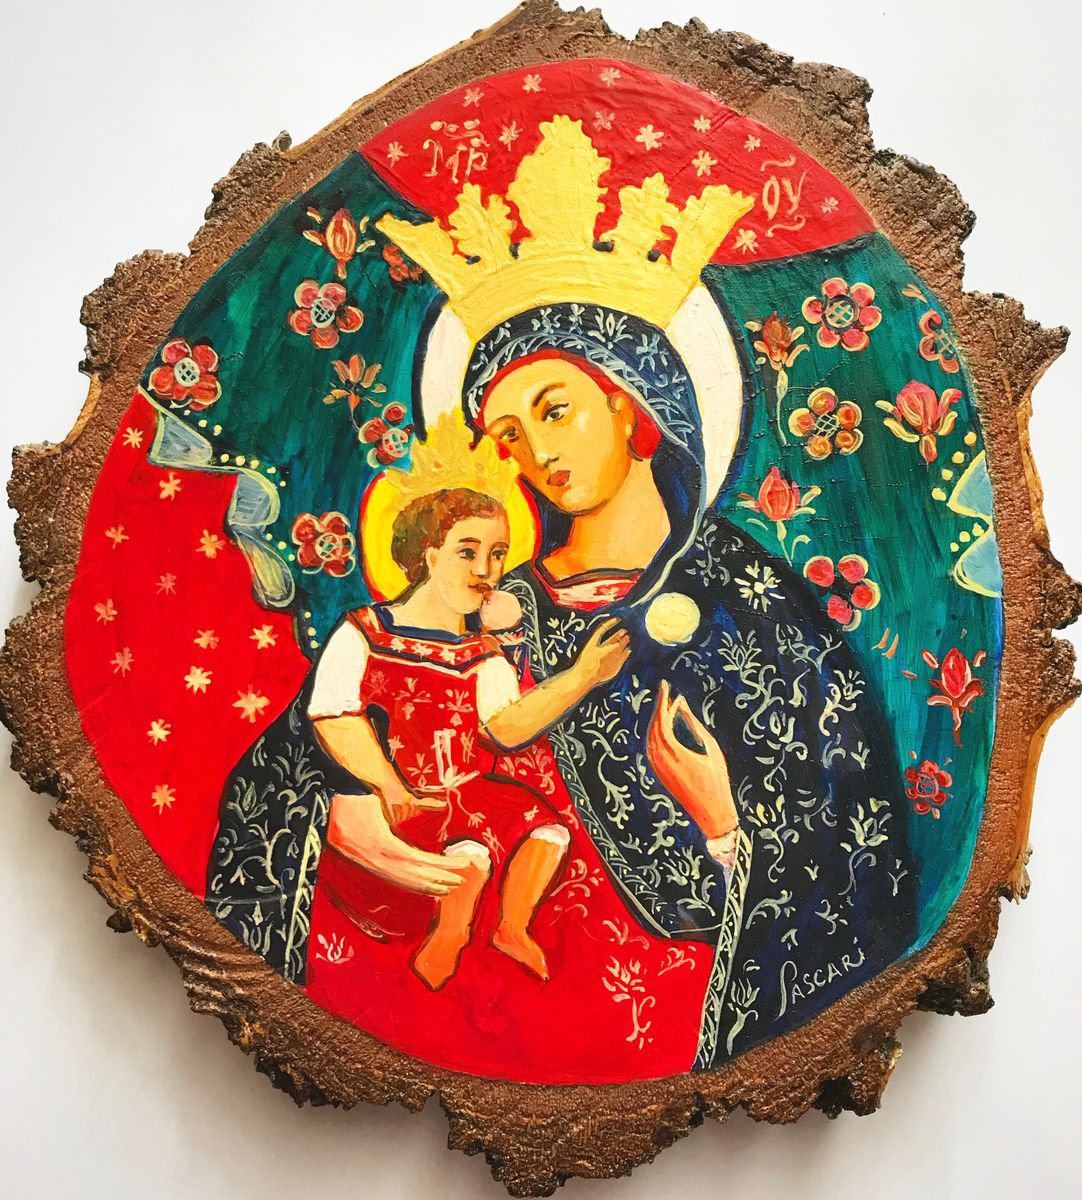 Madonna with child by Olga Pascari